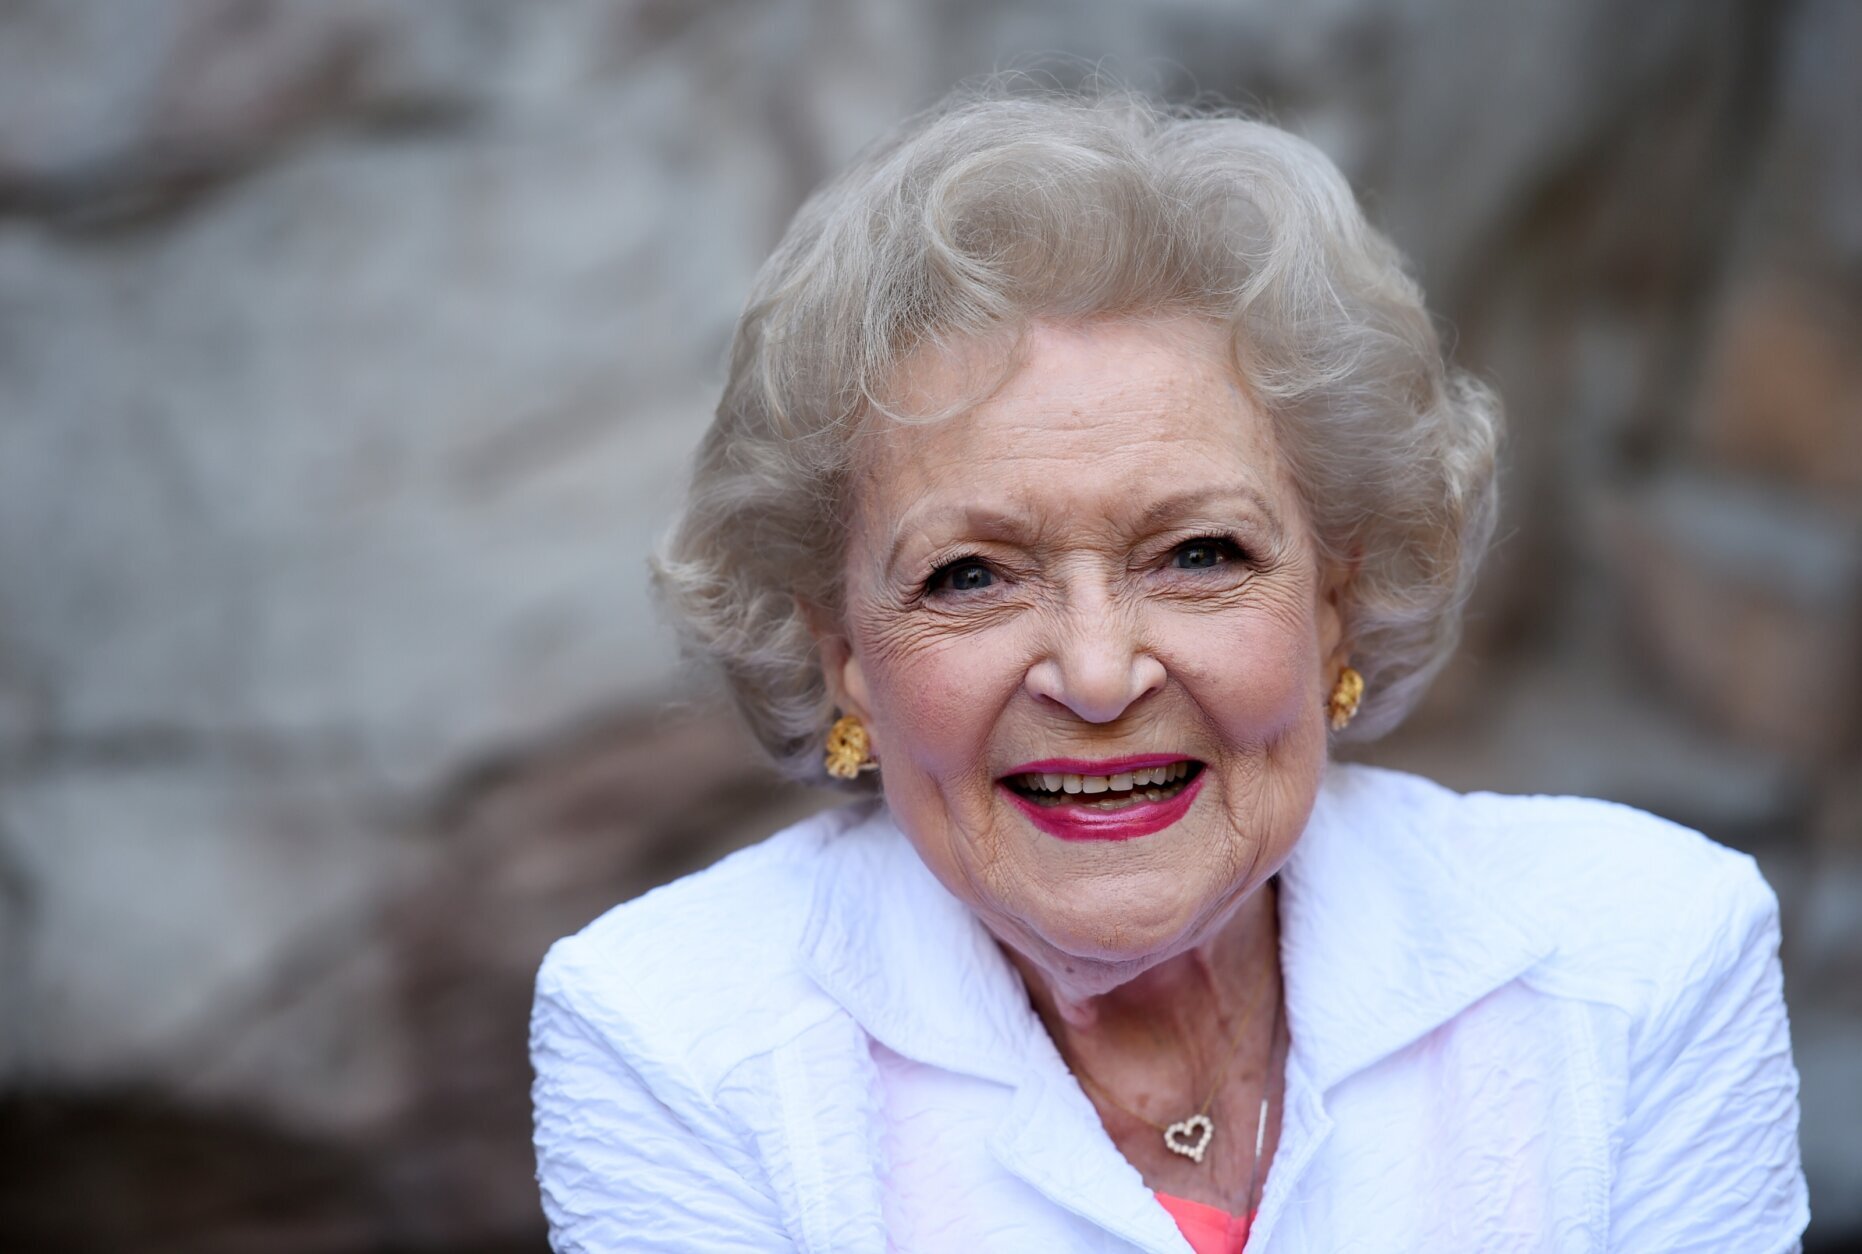 <p>Betty White, former Golden Girl and national treasure, was supposed to turn 100 on Jan. 17. She died Dec. 31.</p>
